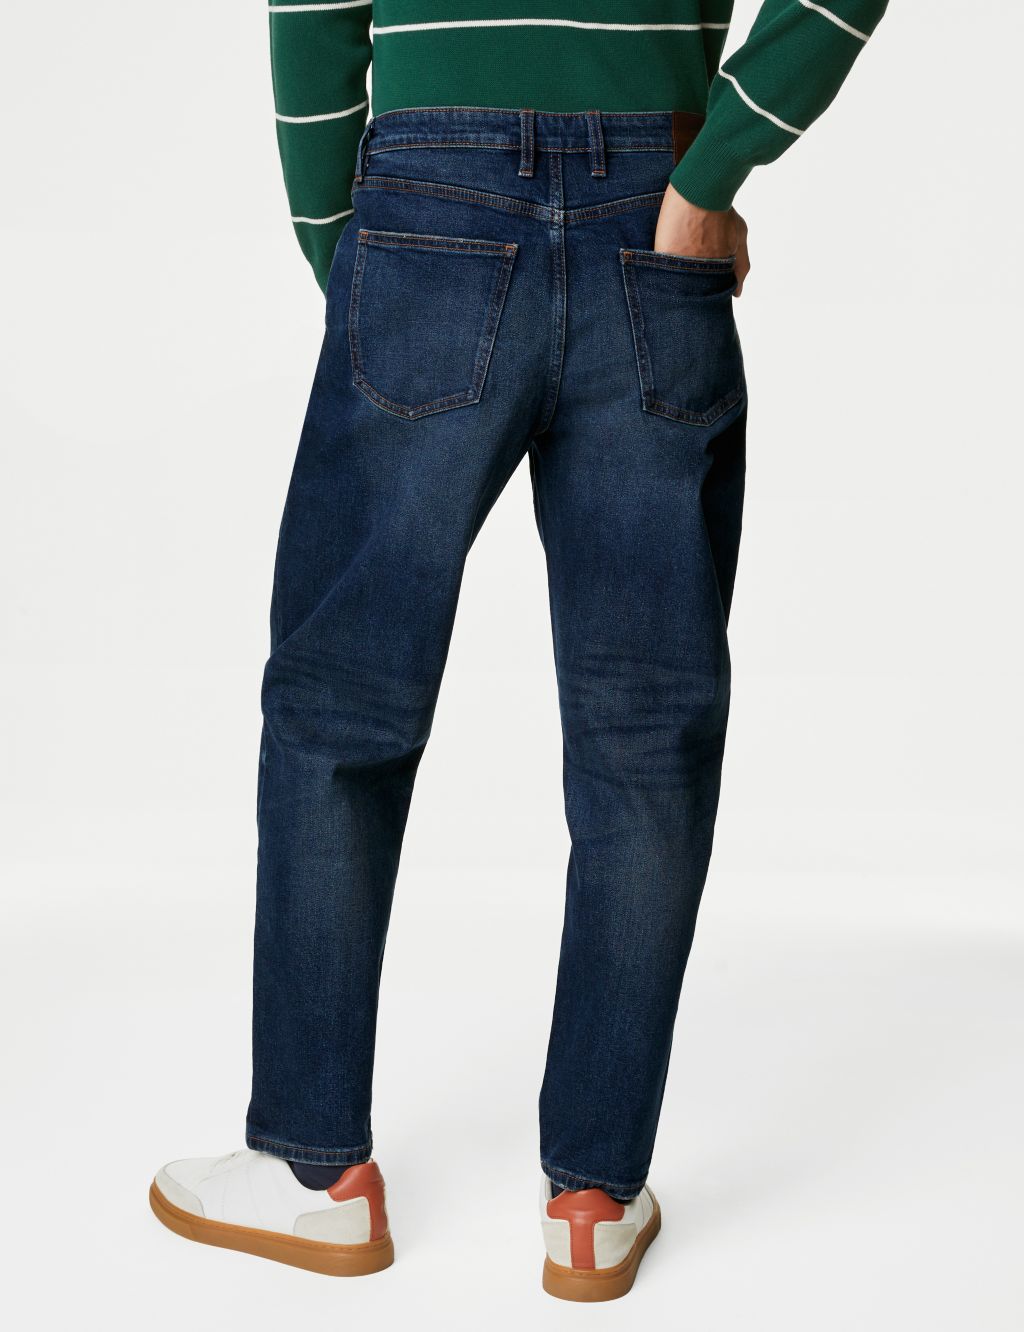 Relaxed Tapered Vintage Wash Jeans image 5